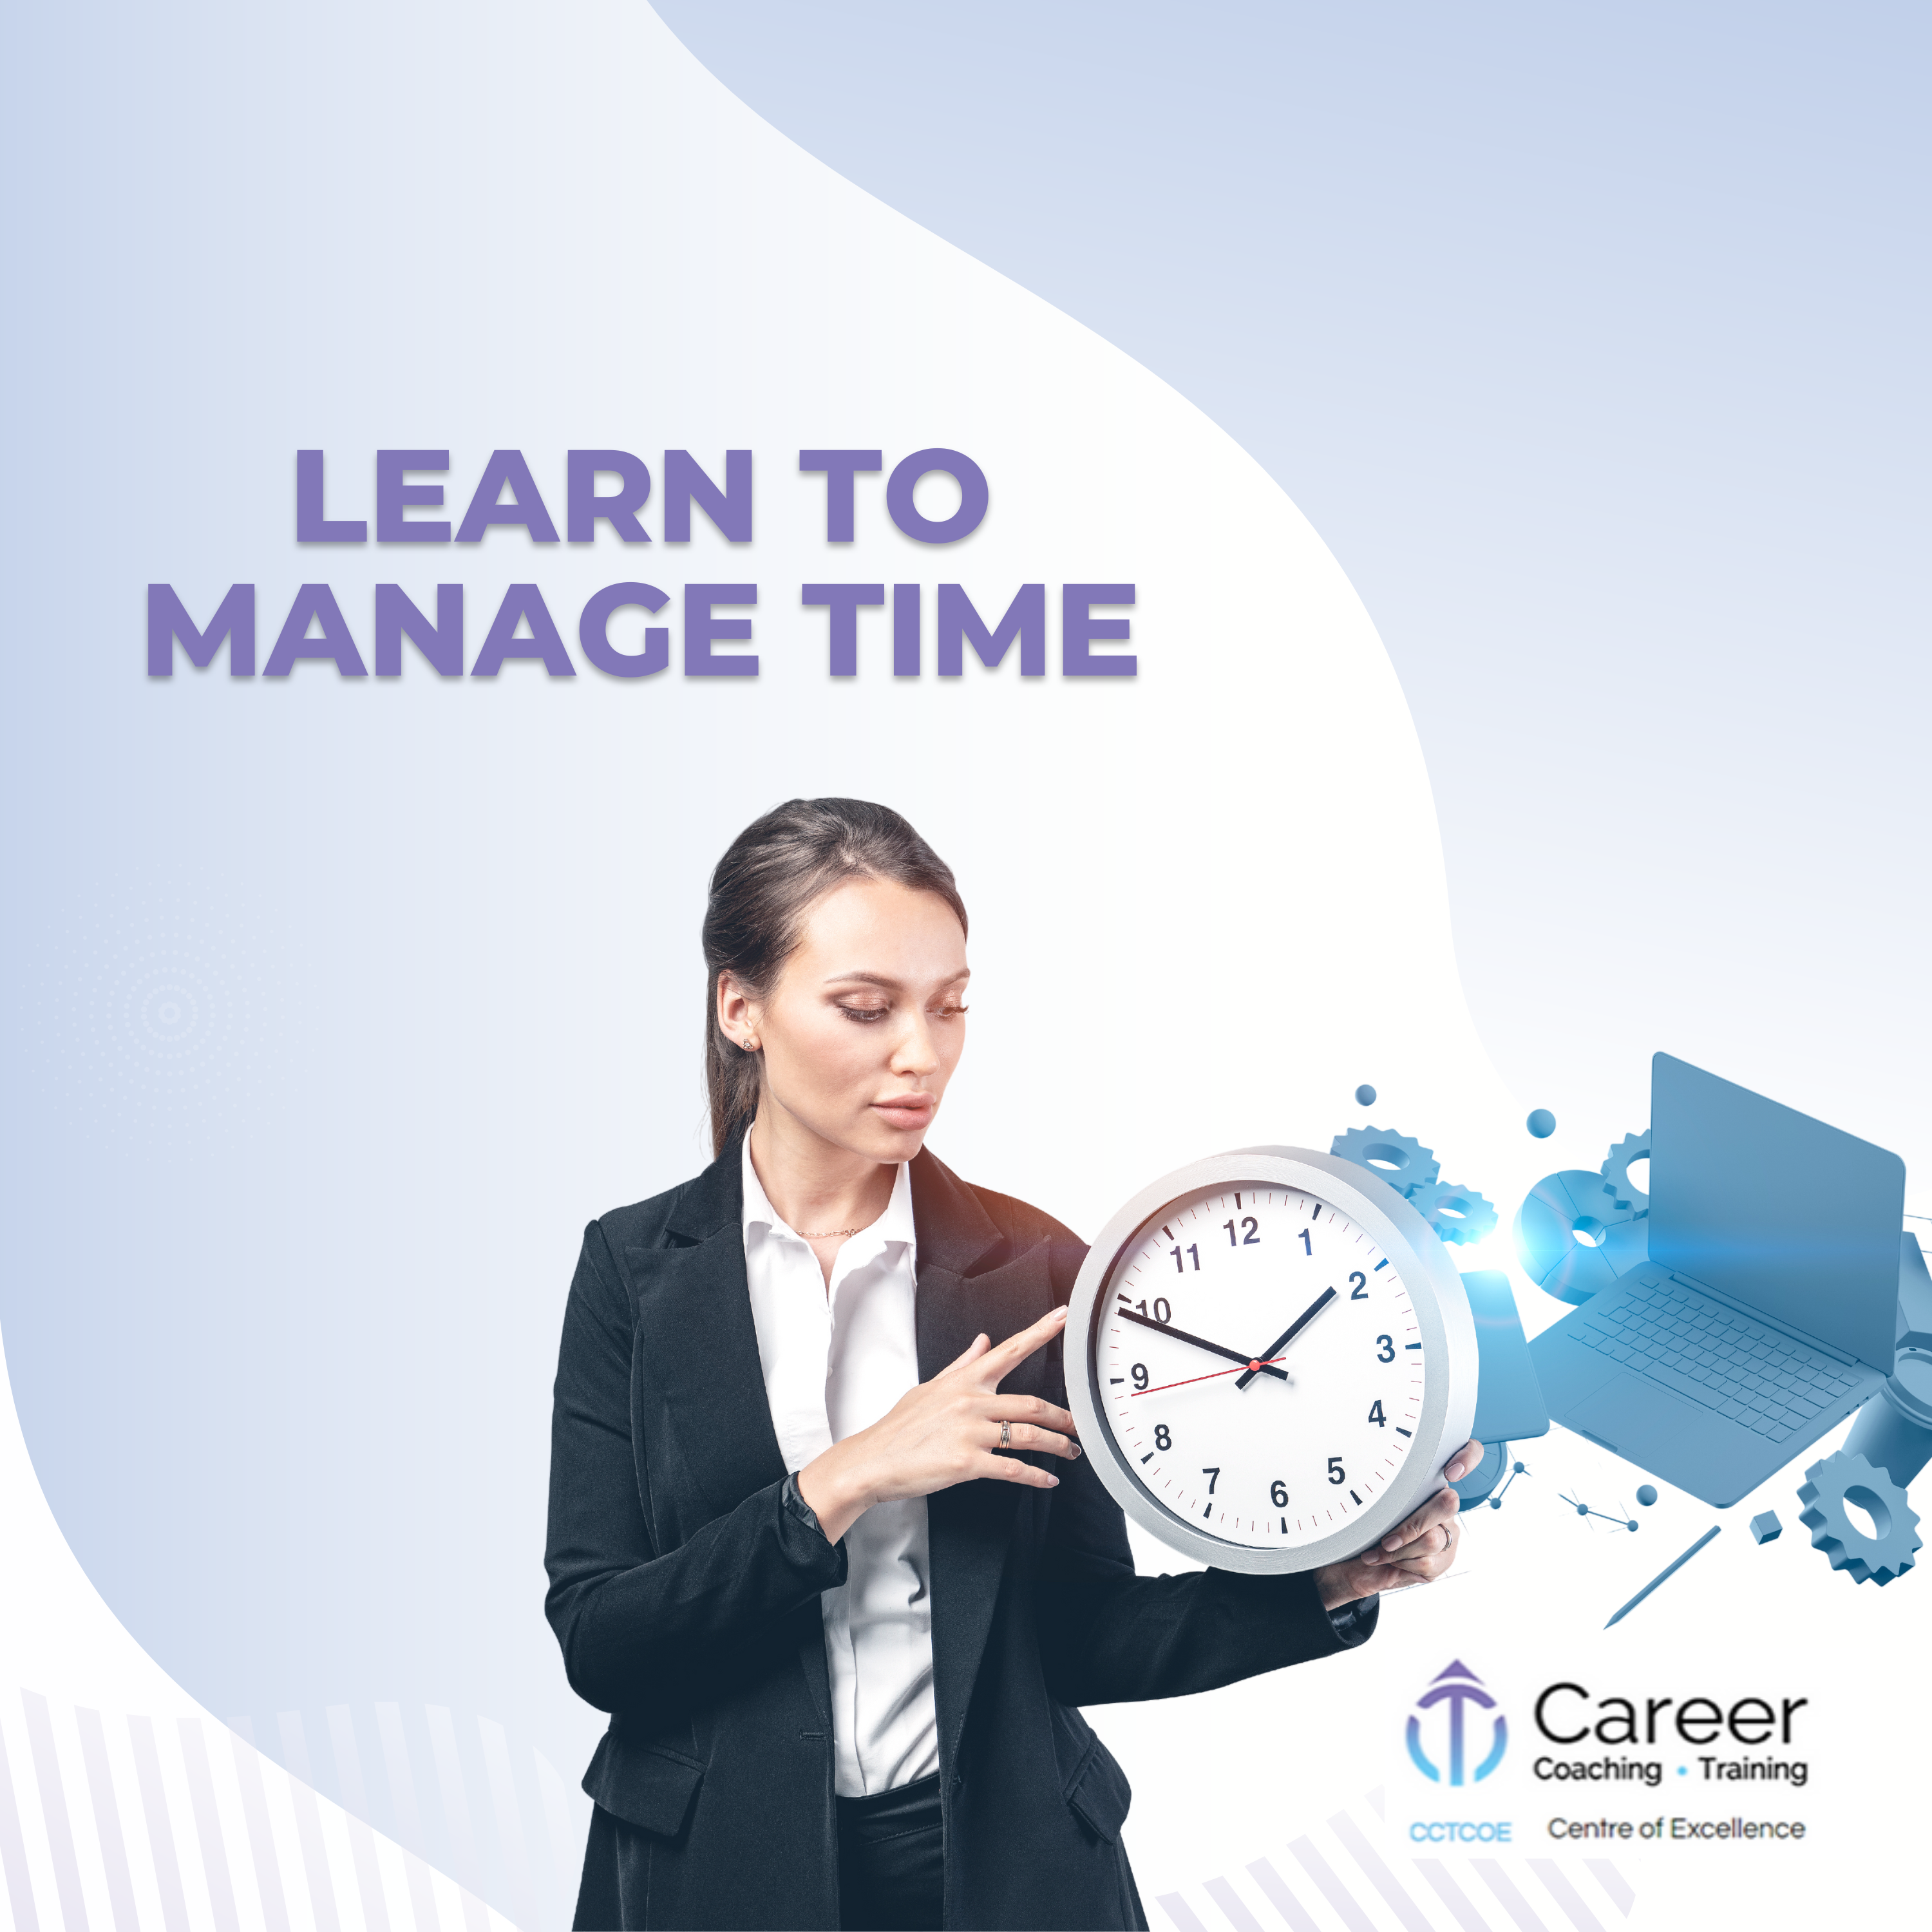 LEARN TO MANAGE TIME